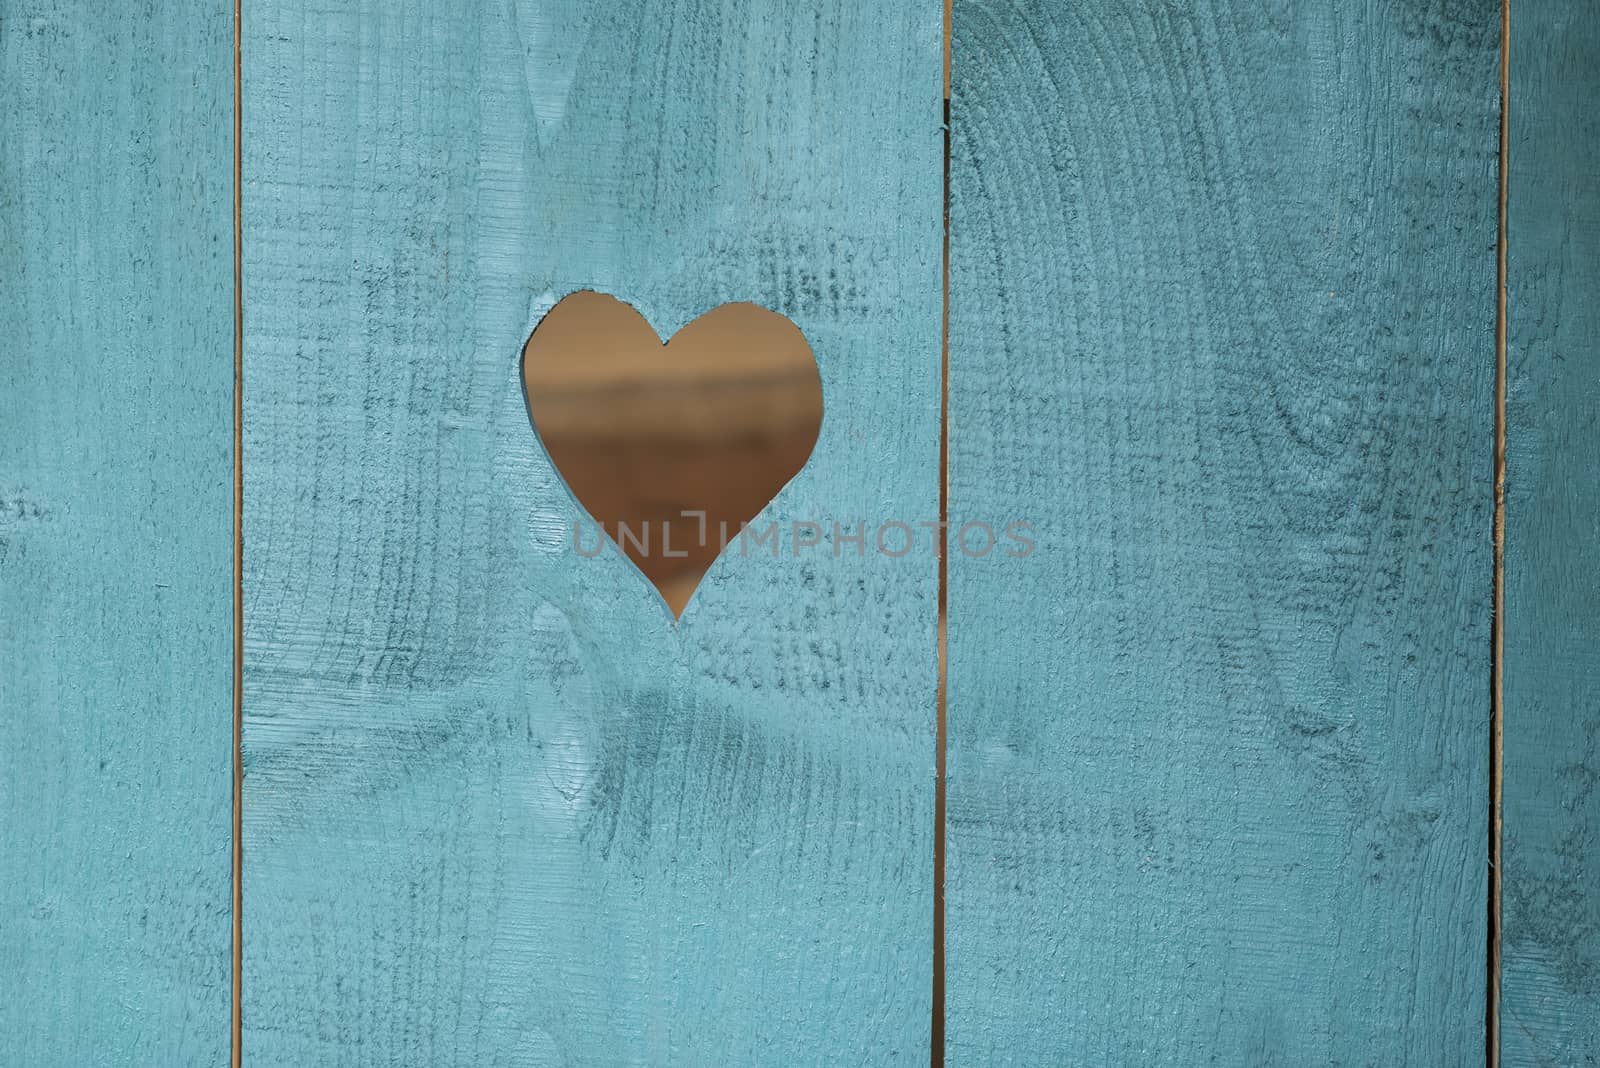 Heart in a wooden blue background
 by Tofotografie